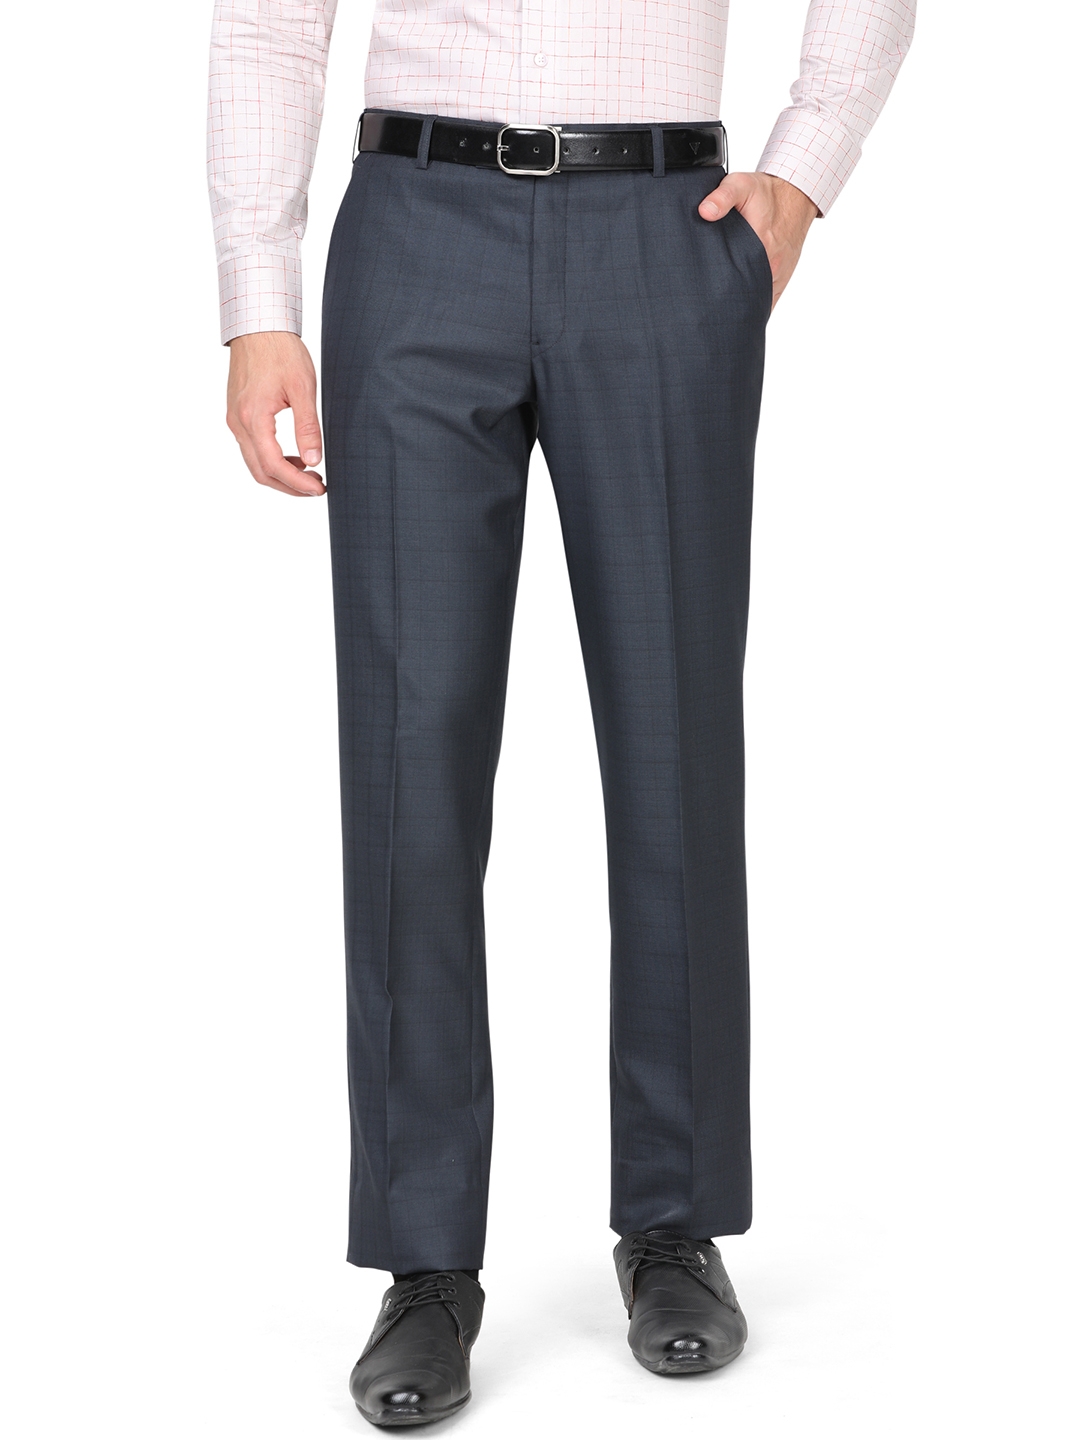 Greenfibre | Blue Checked Classic Fit Formal Trouser | Greenfibre 0